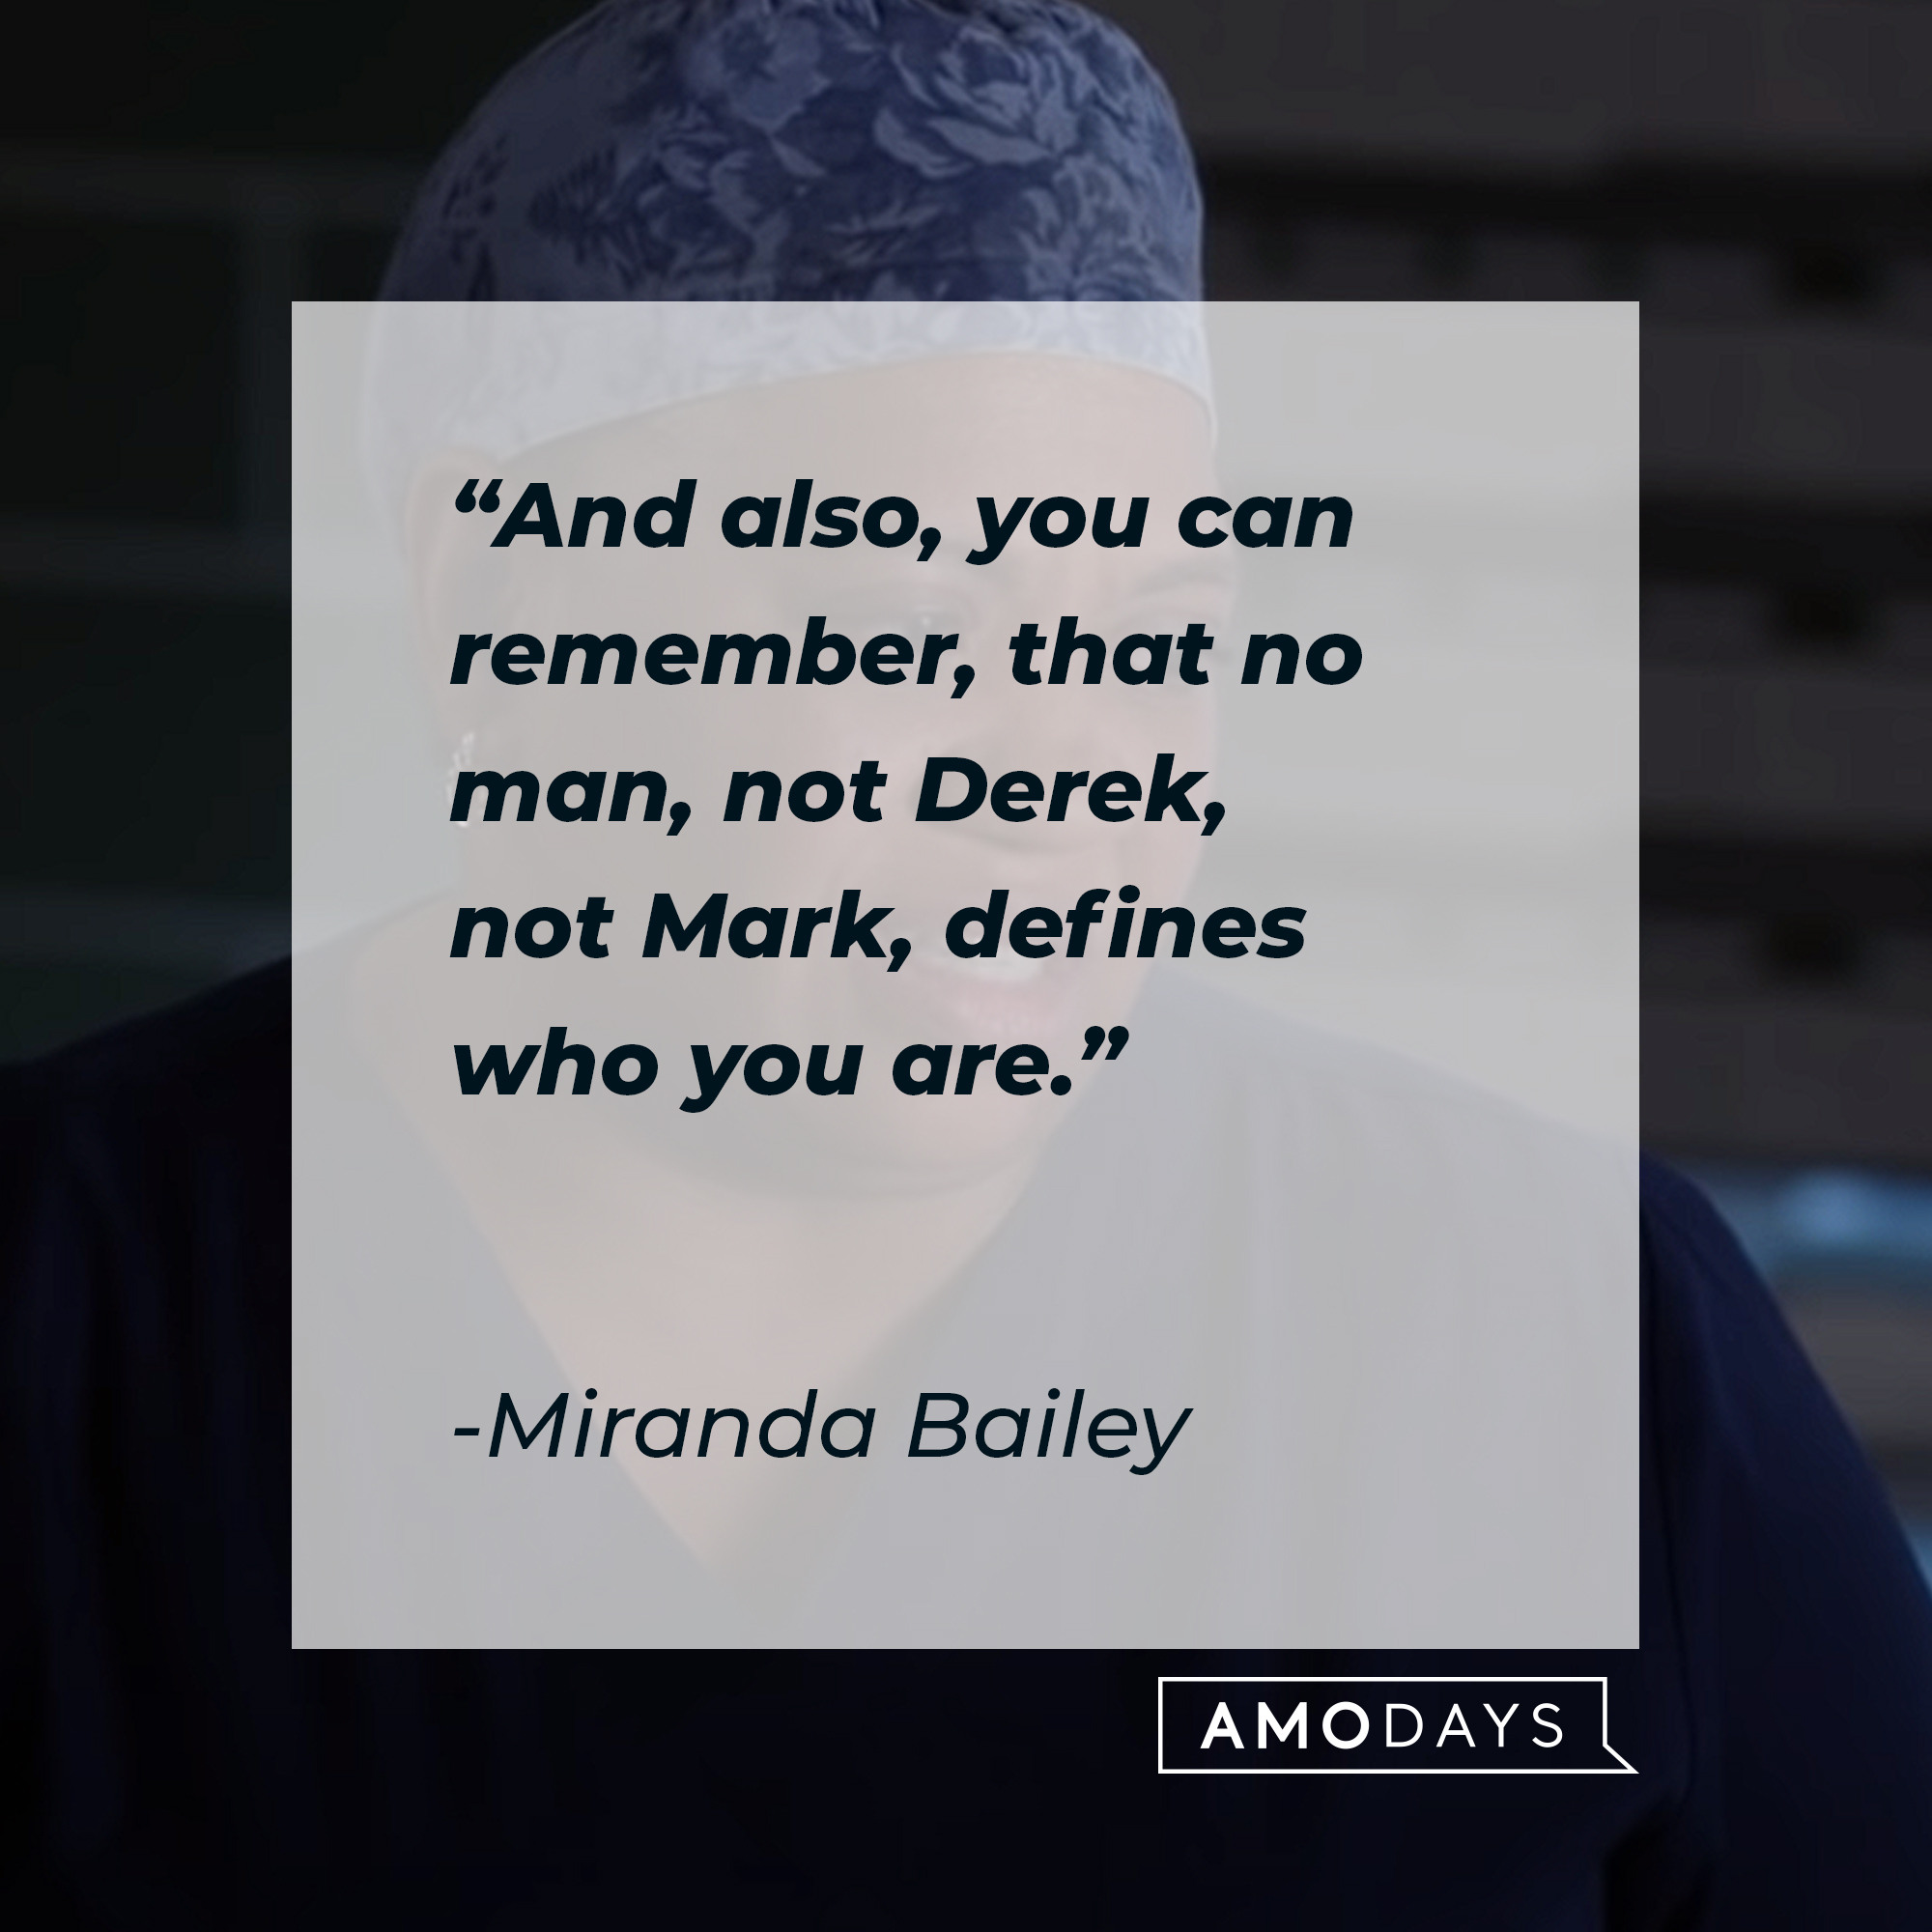 Miranda Bailey's quote: "And also, you can remember, that no man, not Derek, not Mark, defines who you are." | Source: youtube.com/ABCNetwork